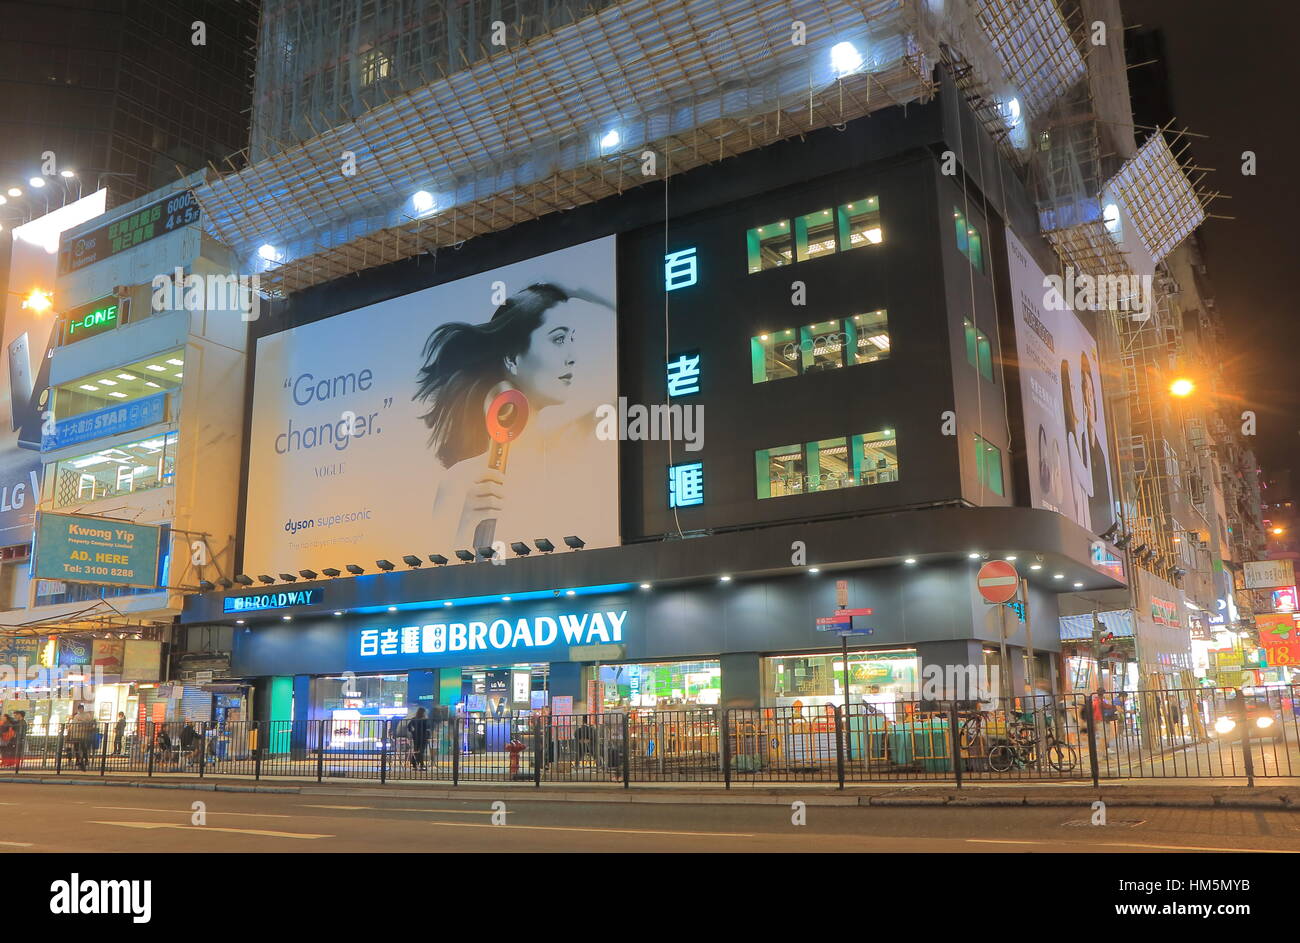 Broadway store in Mong Kok in Hong Kong. Broadway is one of the largest electrical appliances retail chain stores in Hong Kong. Stock Photo